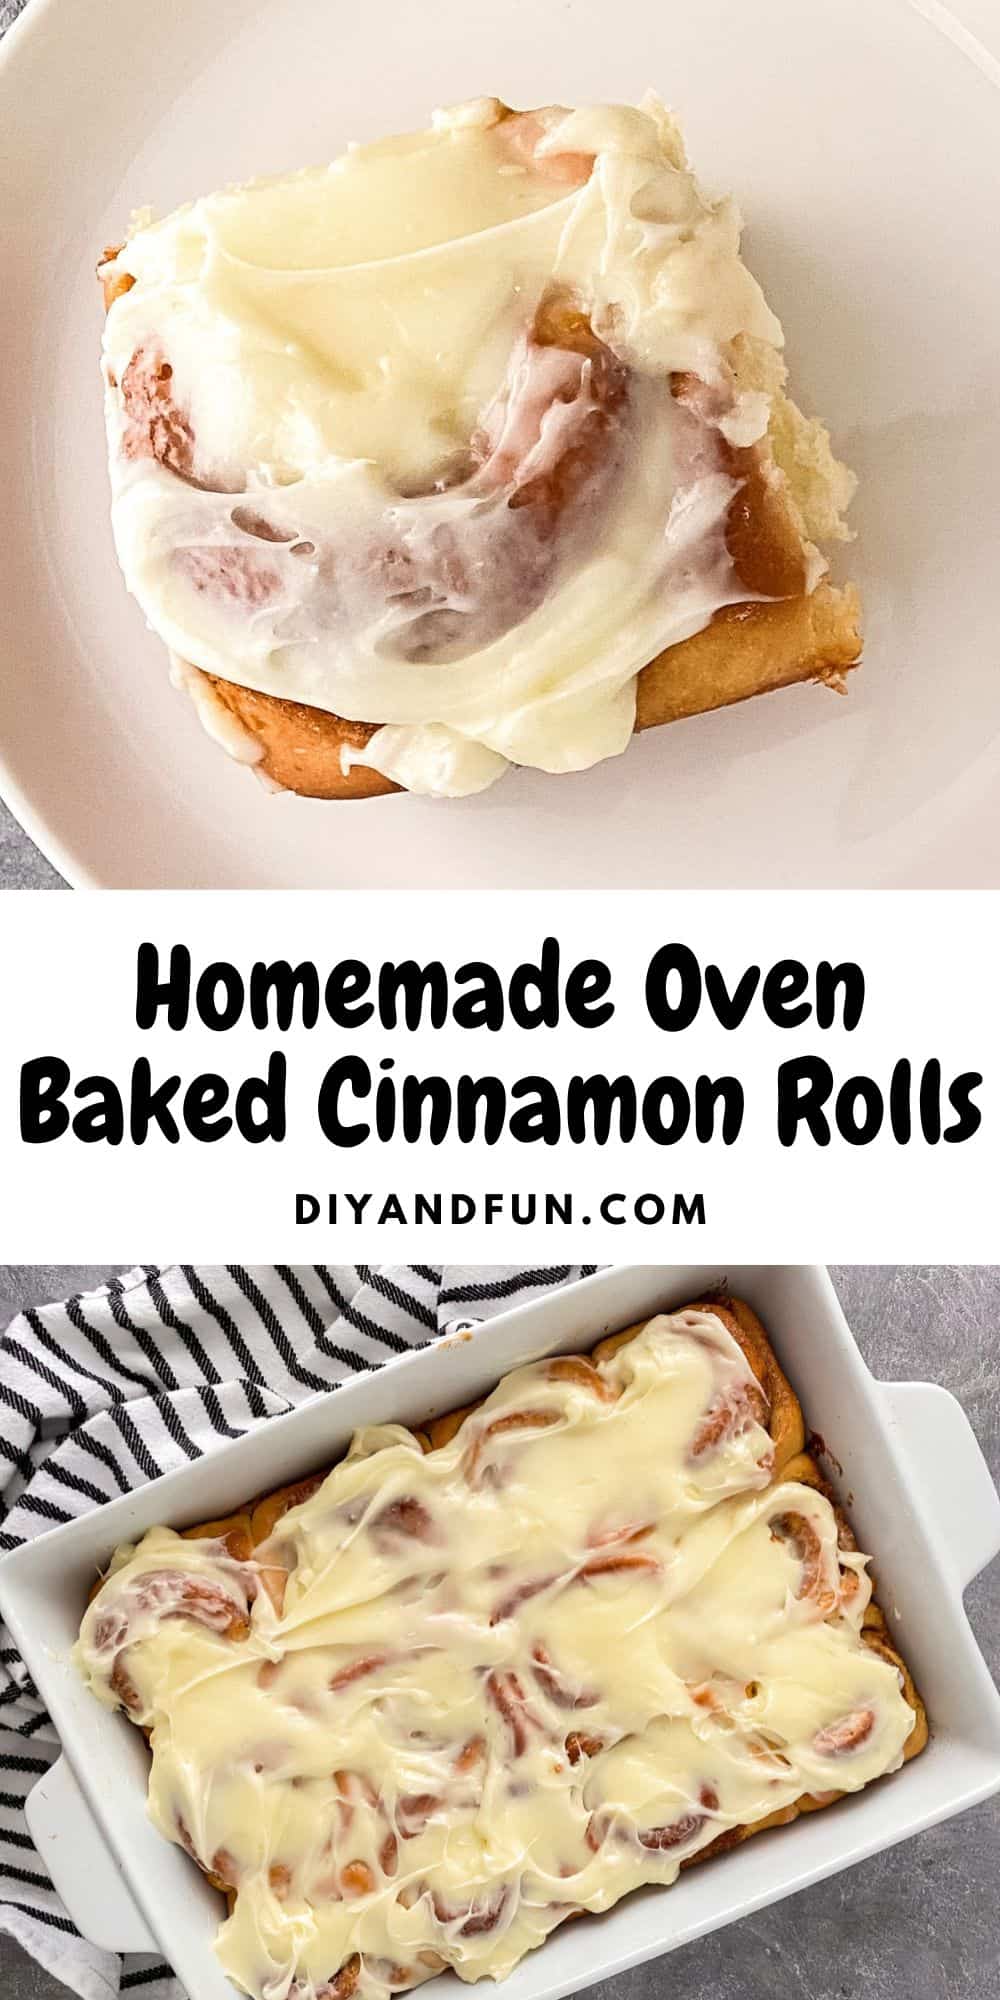 Homemade Oven Baked Cinnamon Rolls, a quick and simple breakfast or brunch idea for a crowd. Decadent, gooey, and sweet!